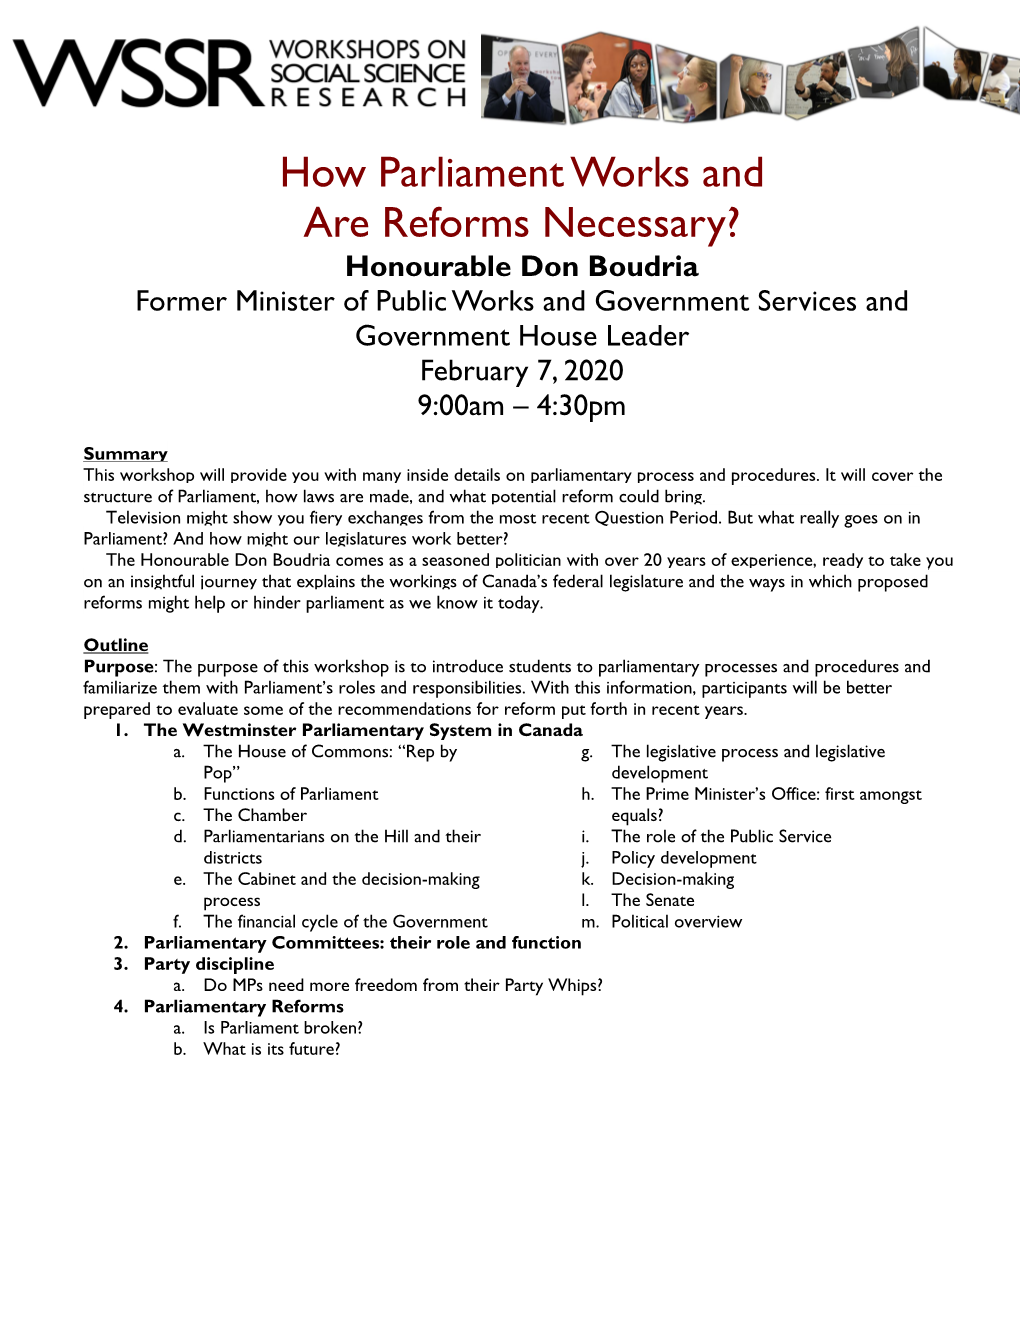 How Parliament Works and Are Reforms Necessary?